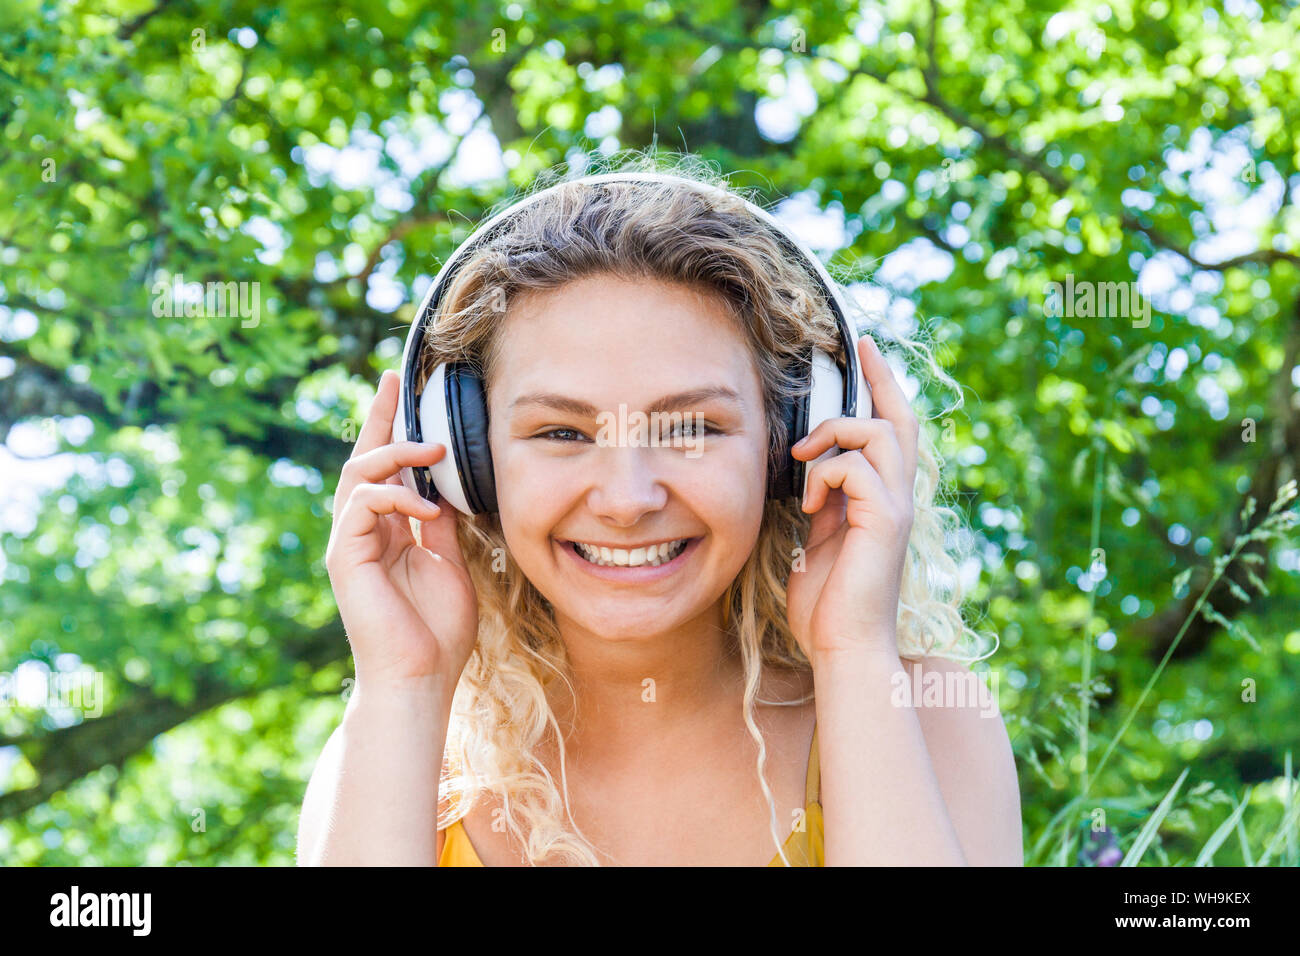 Smiling young woman listening to music, looking at camera Stock Photo